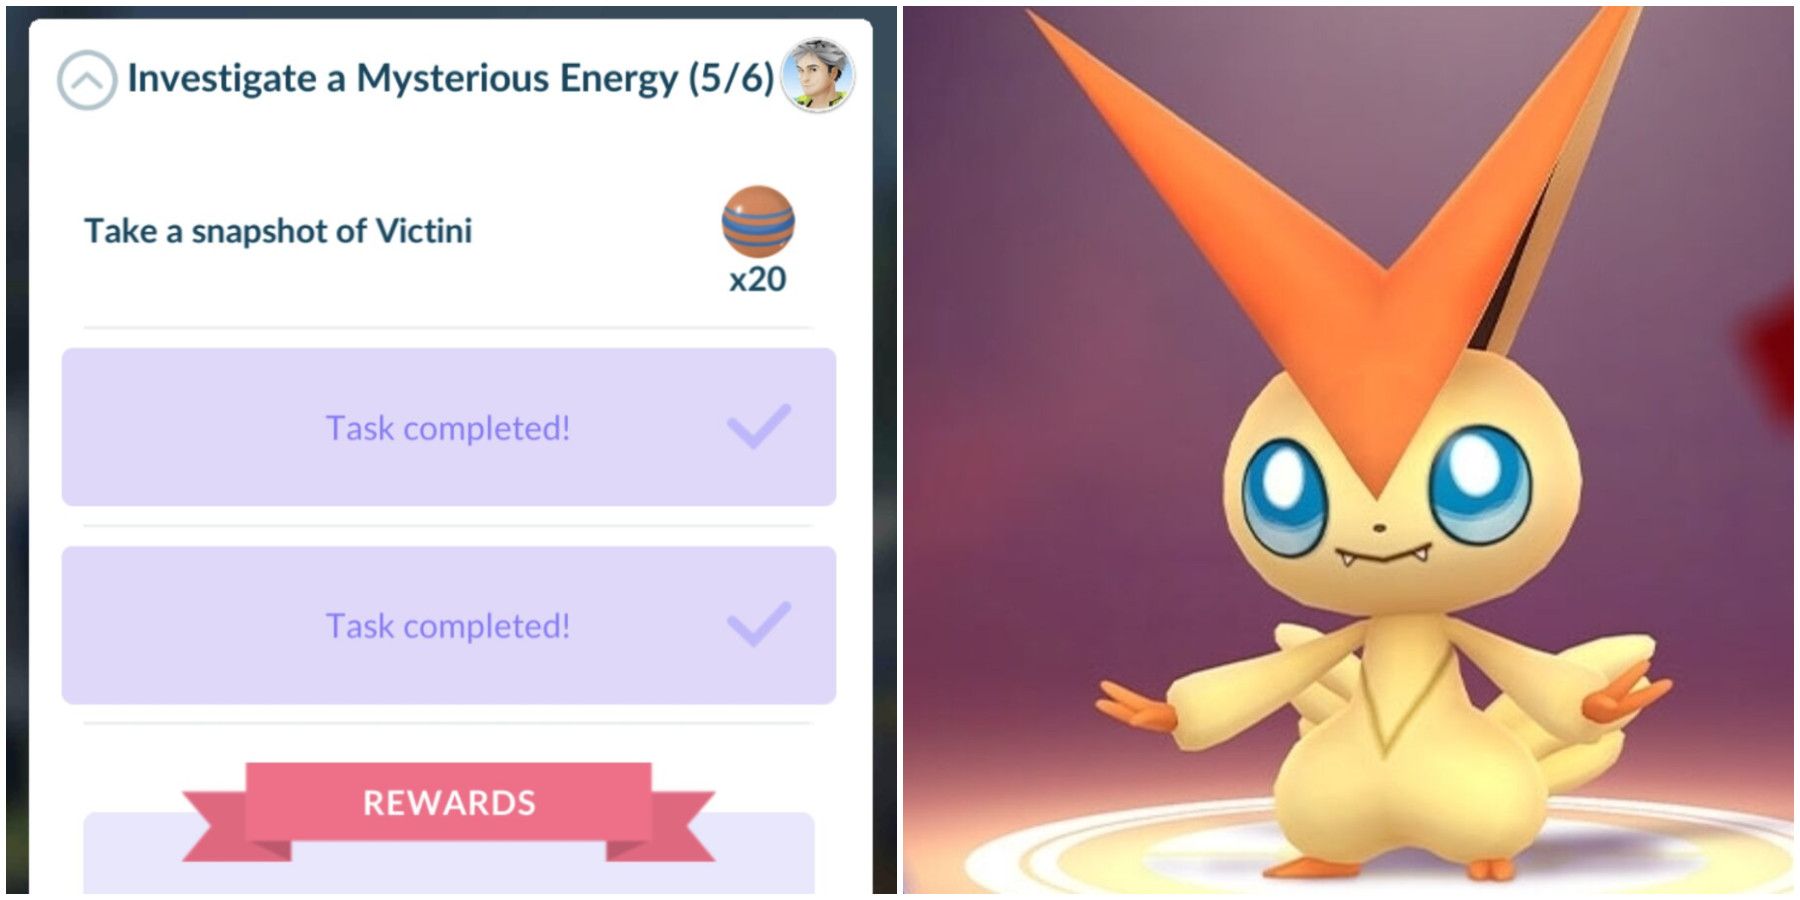 Pokémon Go Finding Your Voice quest tasks and rewards - every step